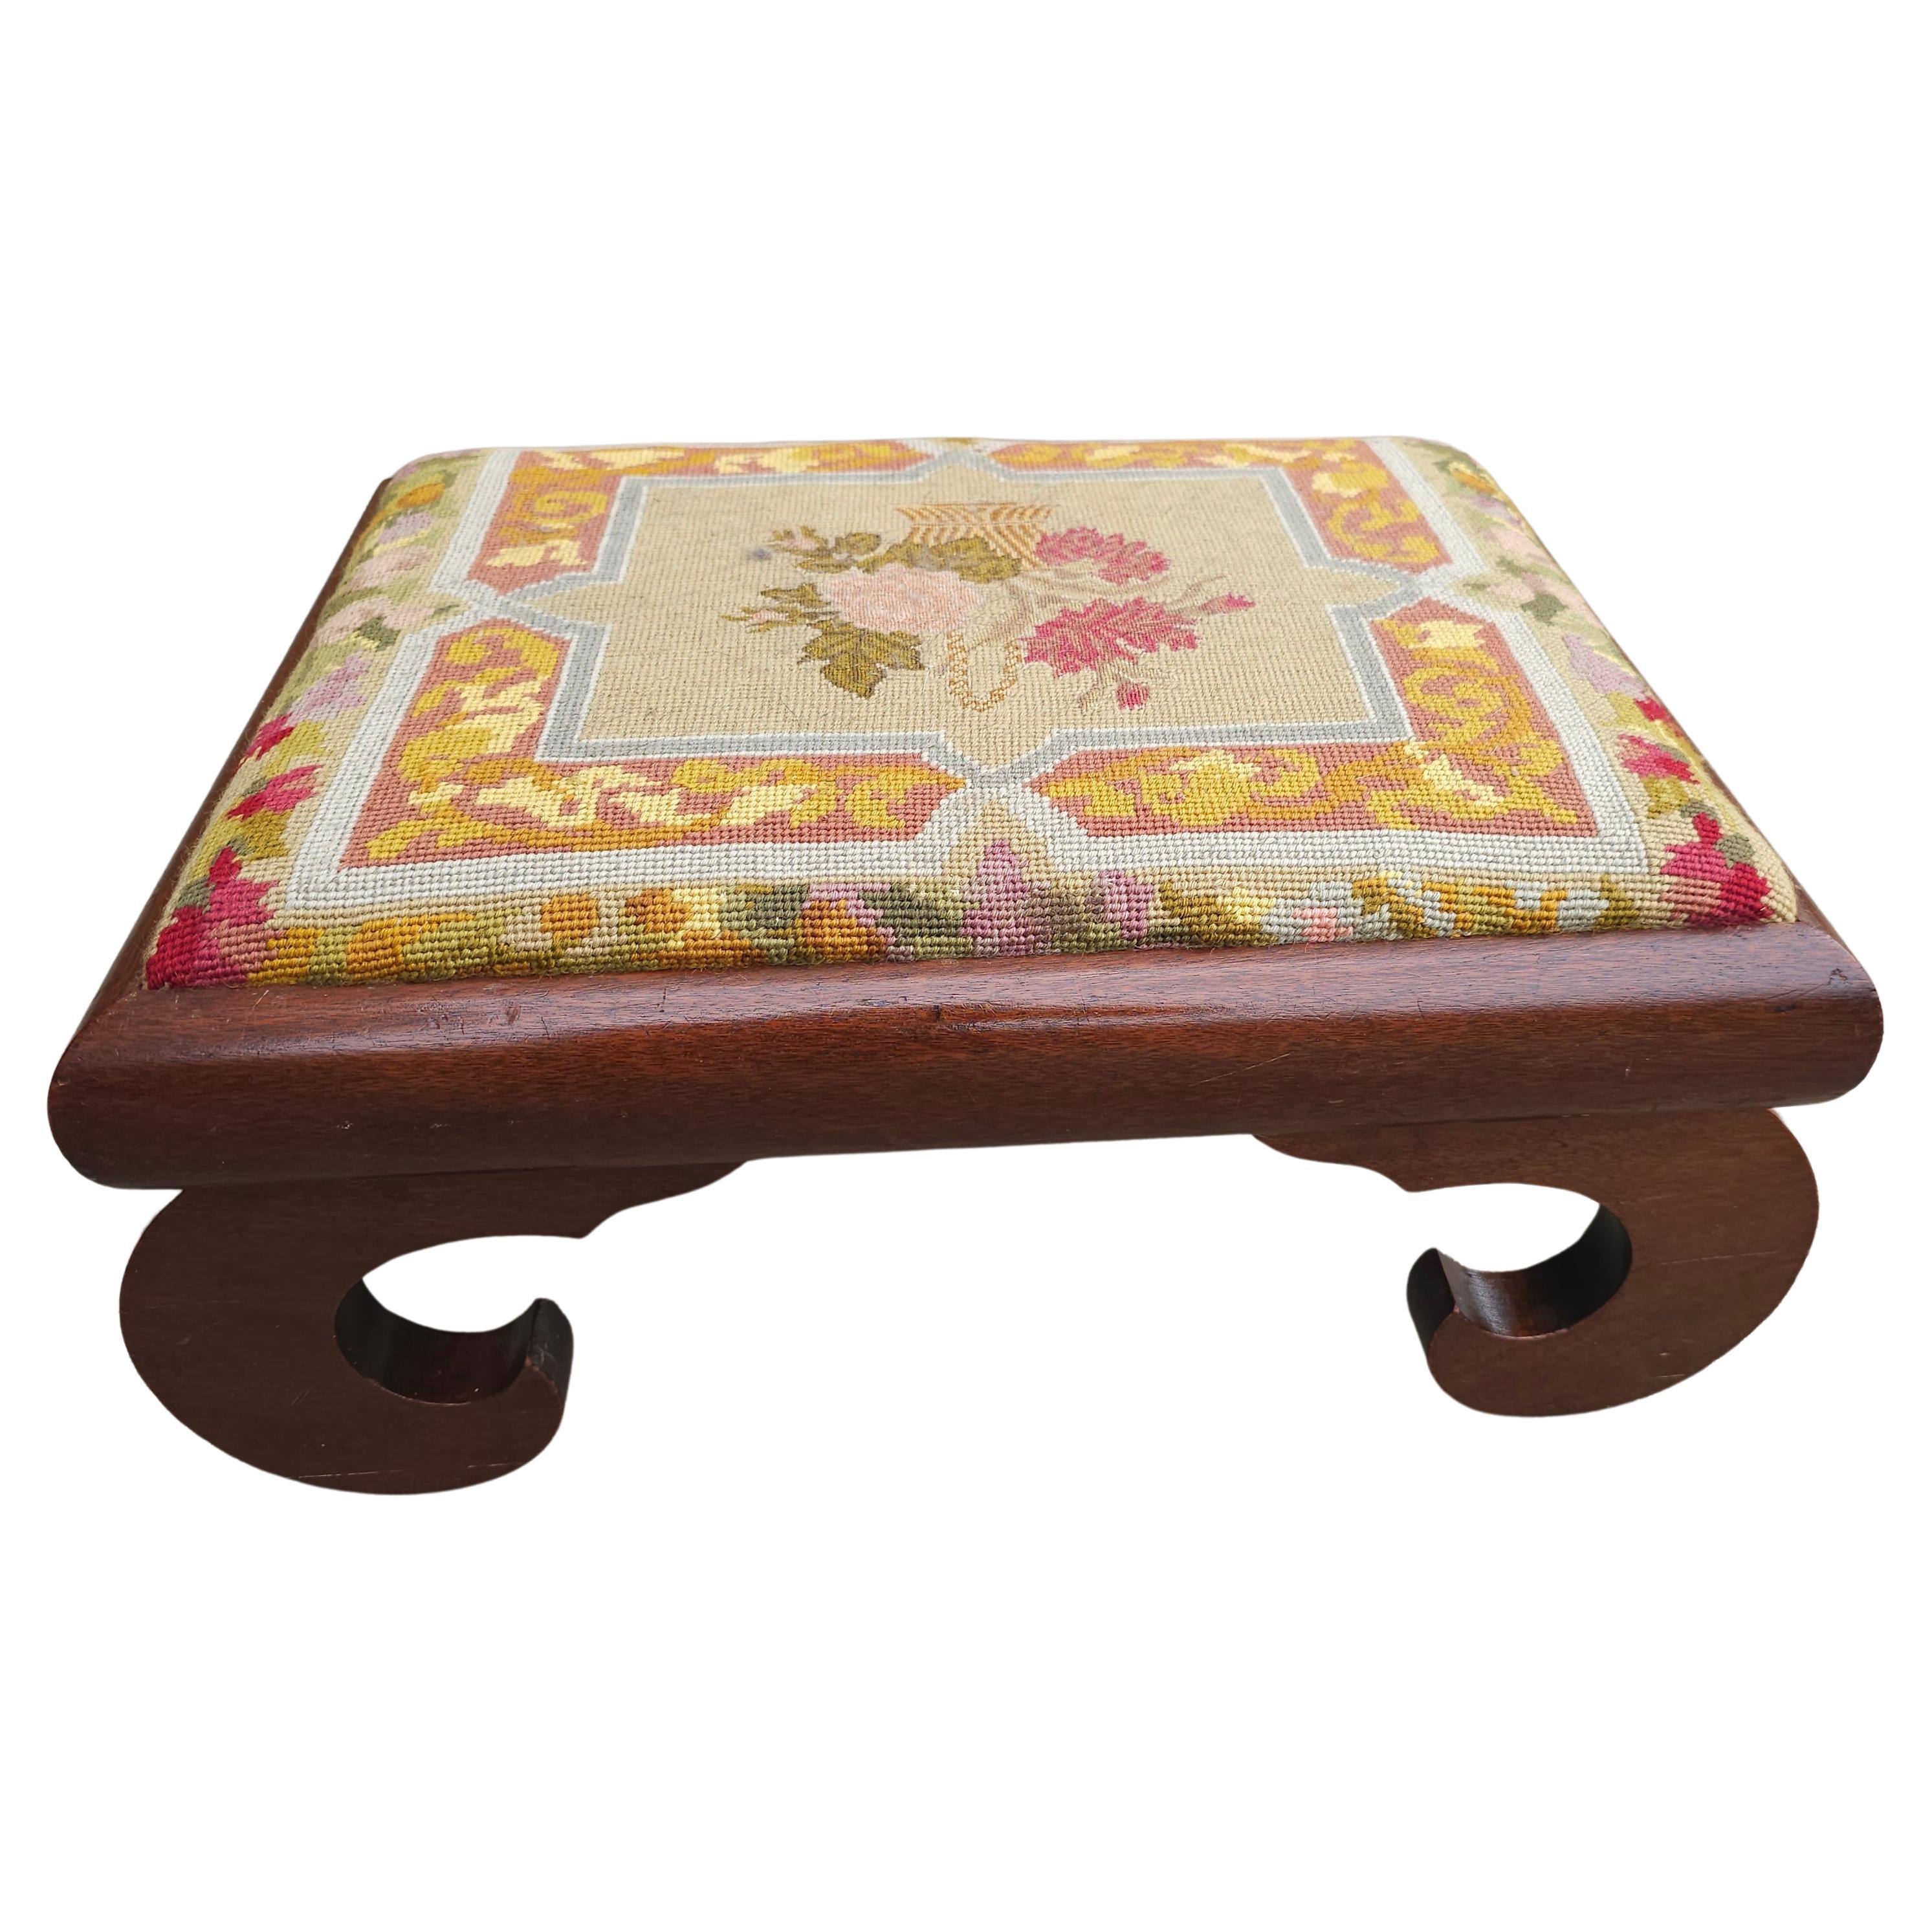 19th Century American Empire Magogany and Needlepoint Upholstered Foot Stool For Sale 2